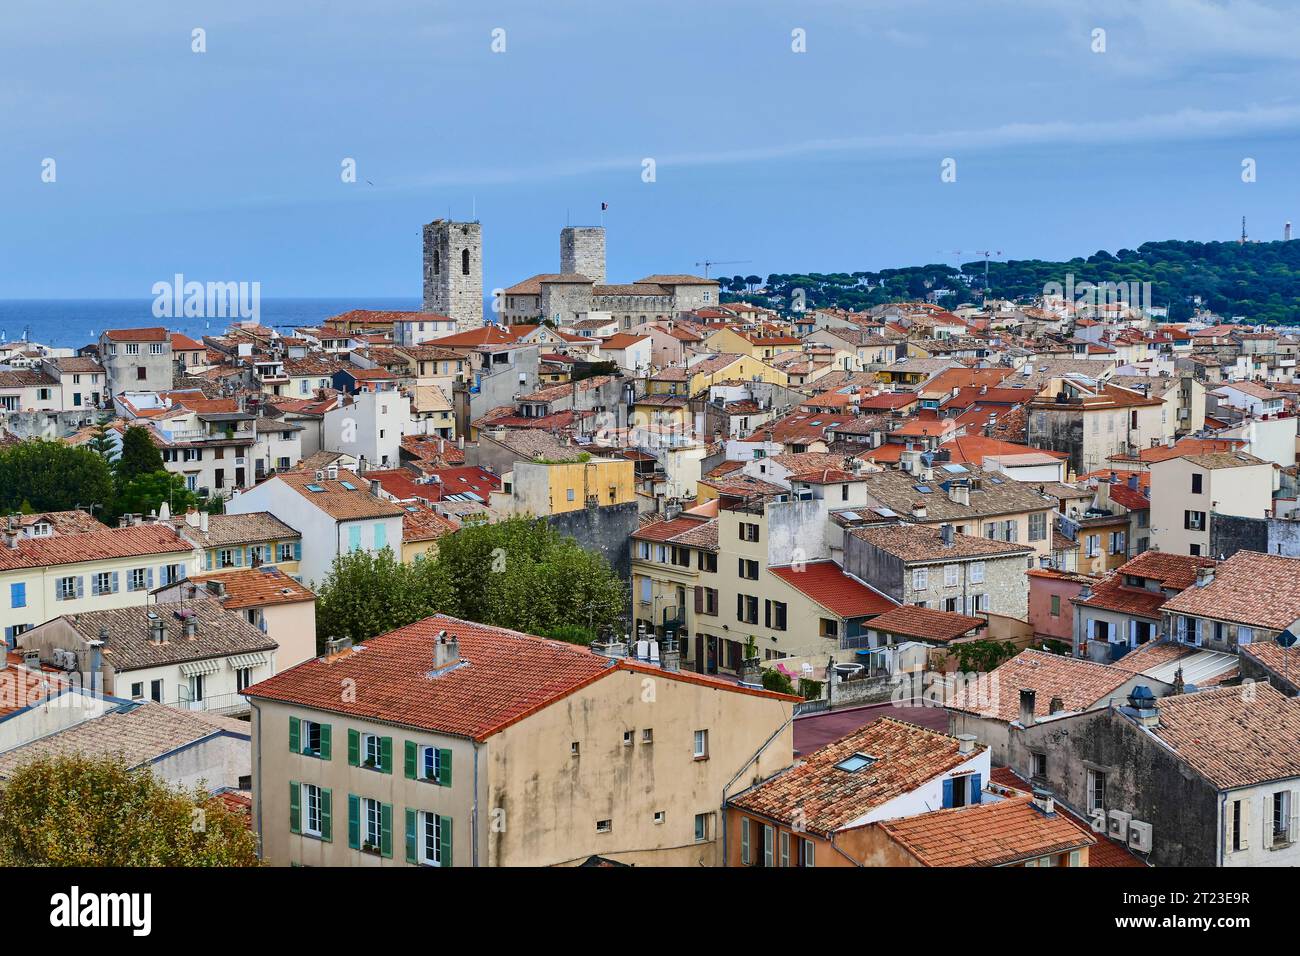 Antibes old town on the French Riviera Stock Photo